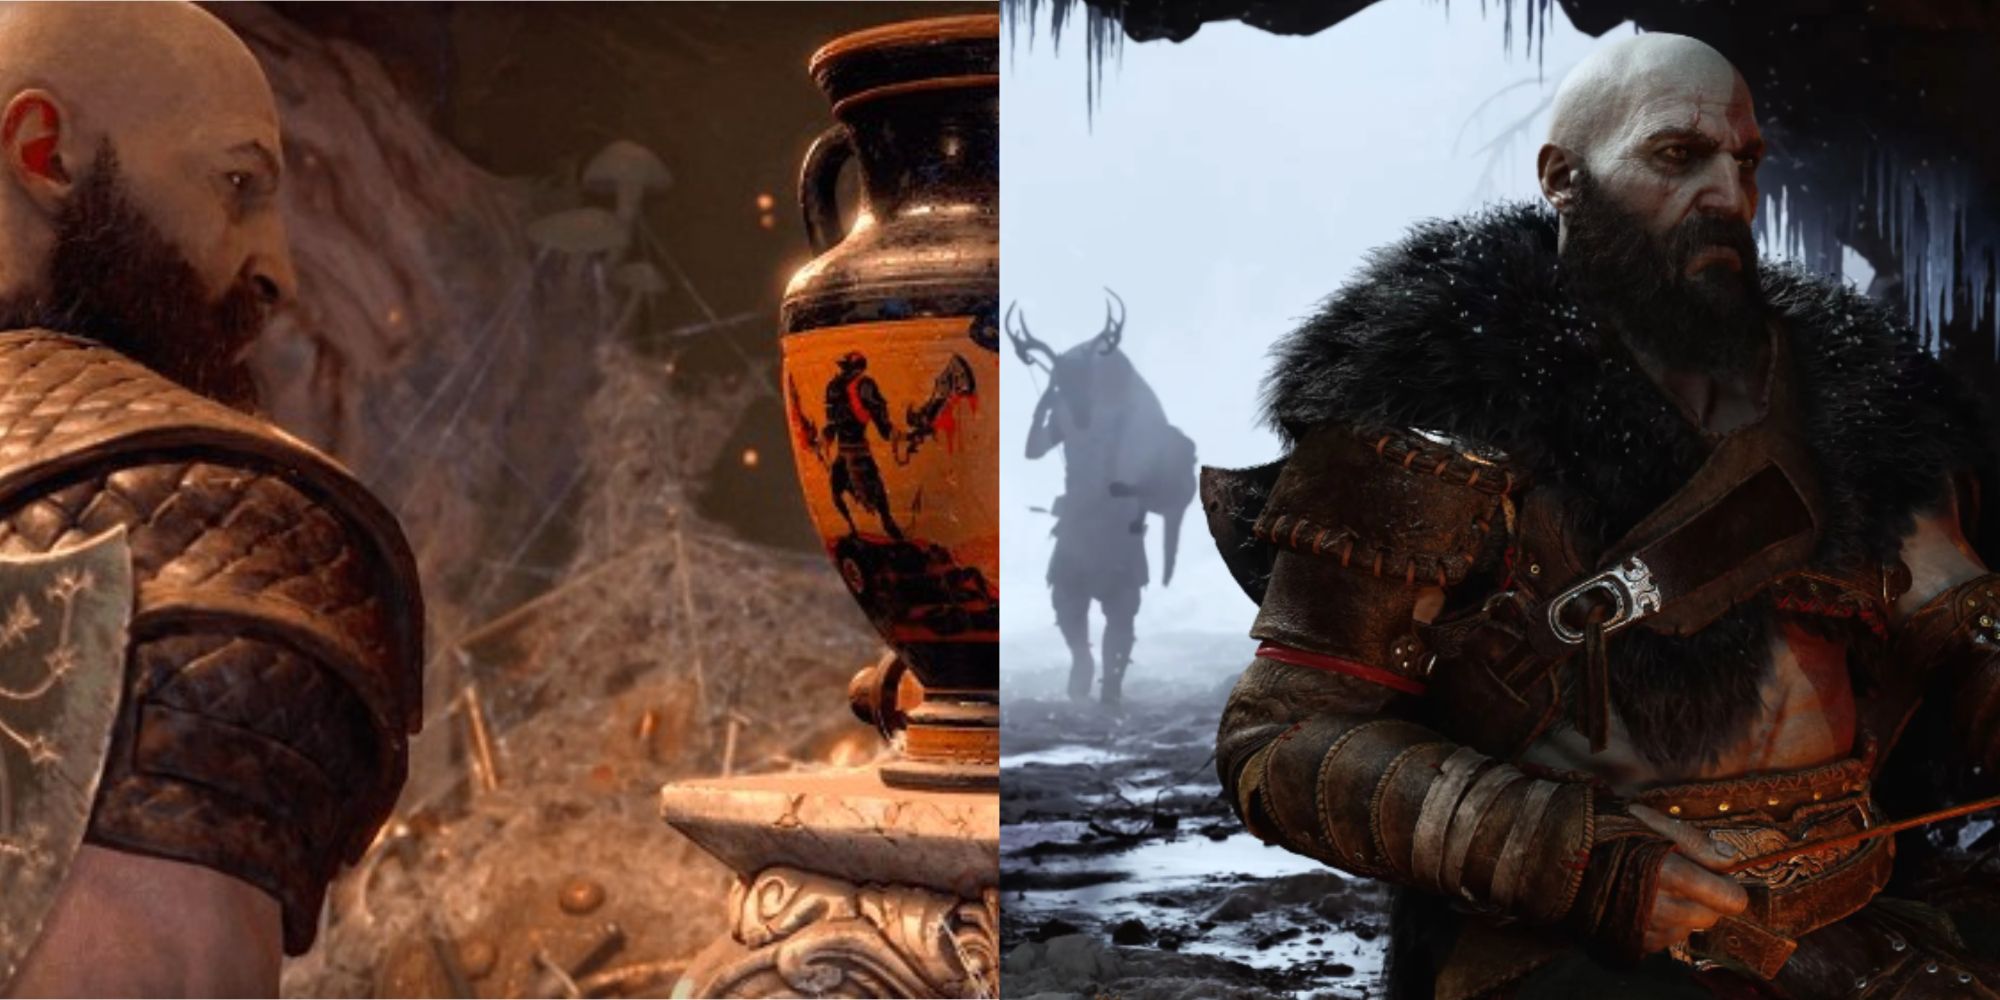 Split images of Kratos looking at a vase and Kratos wearing a fur coat in God of War